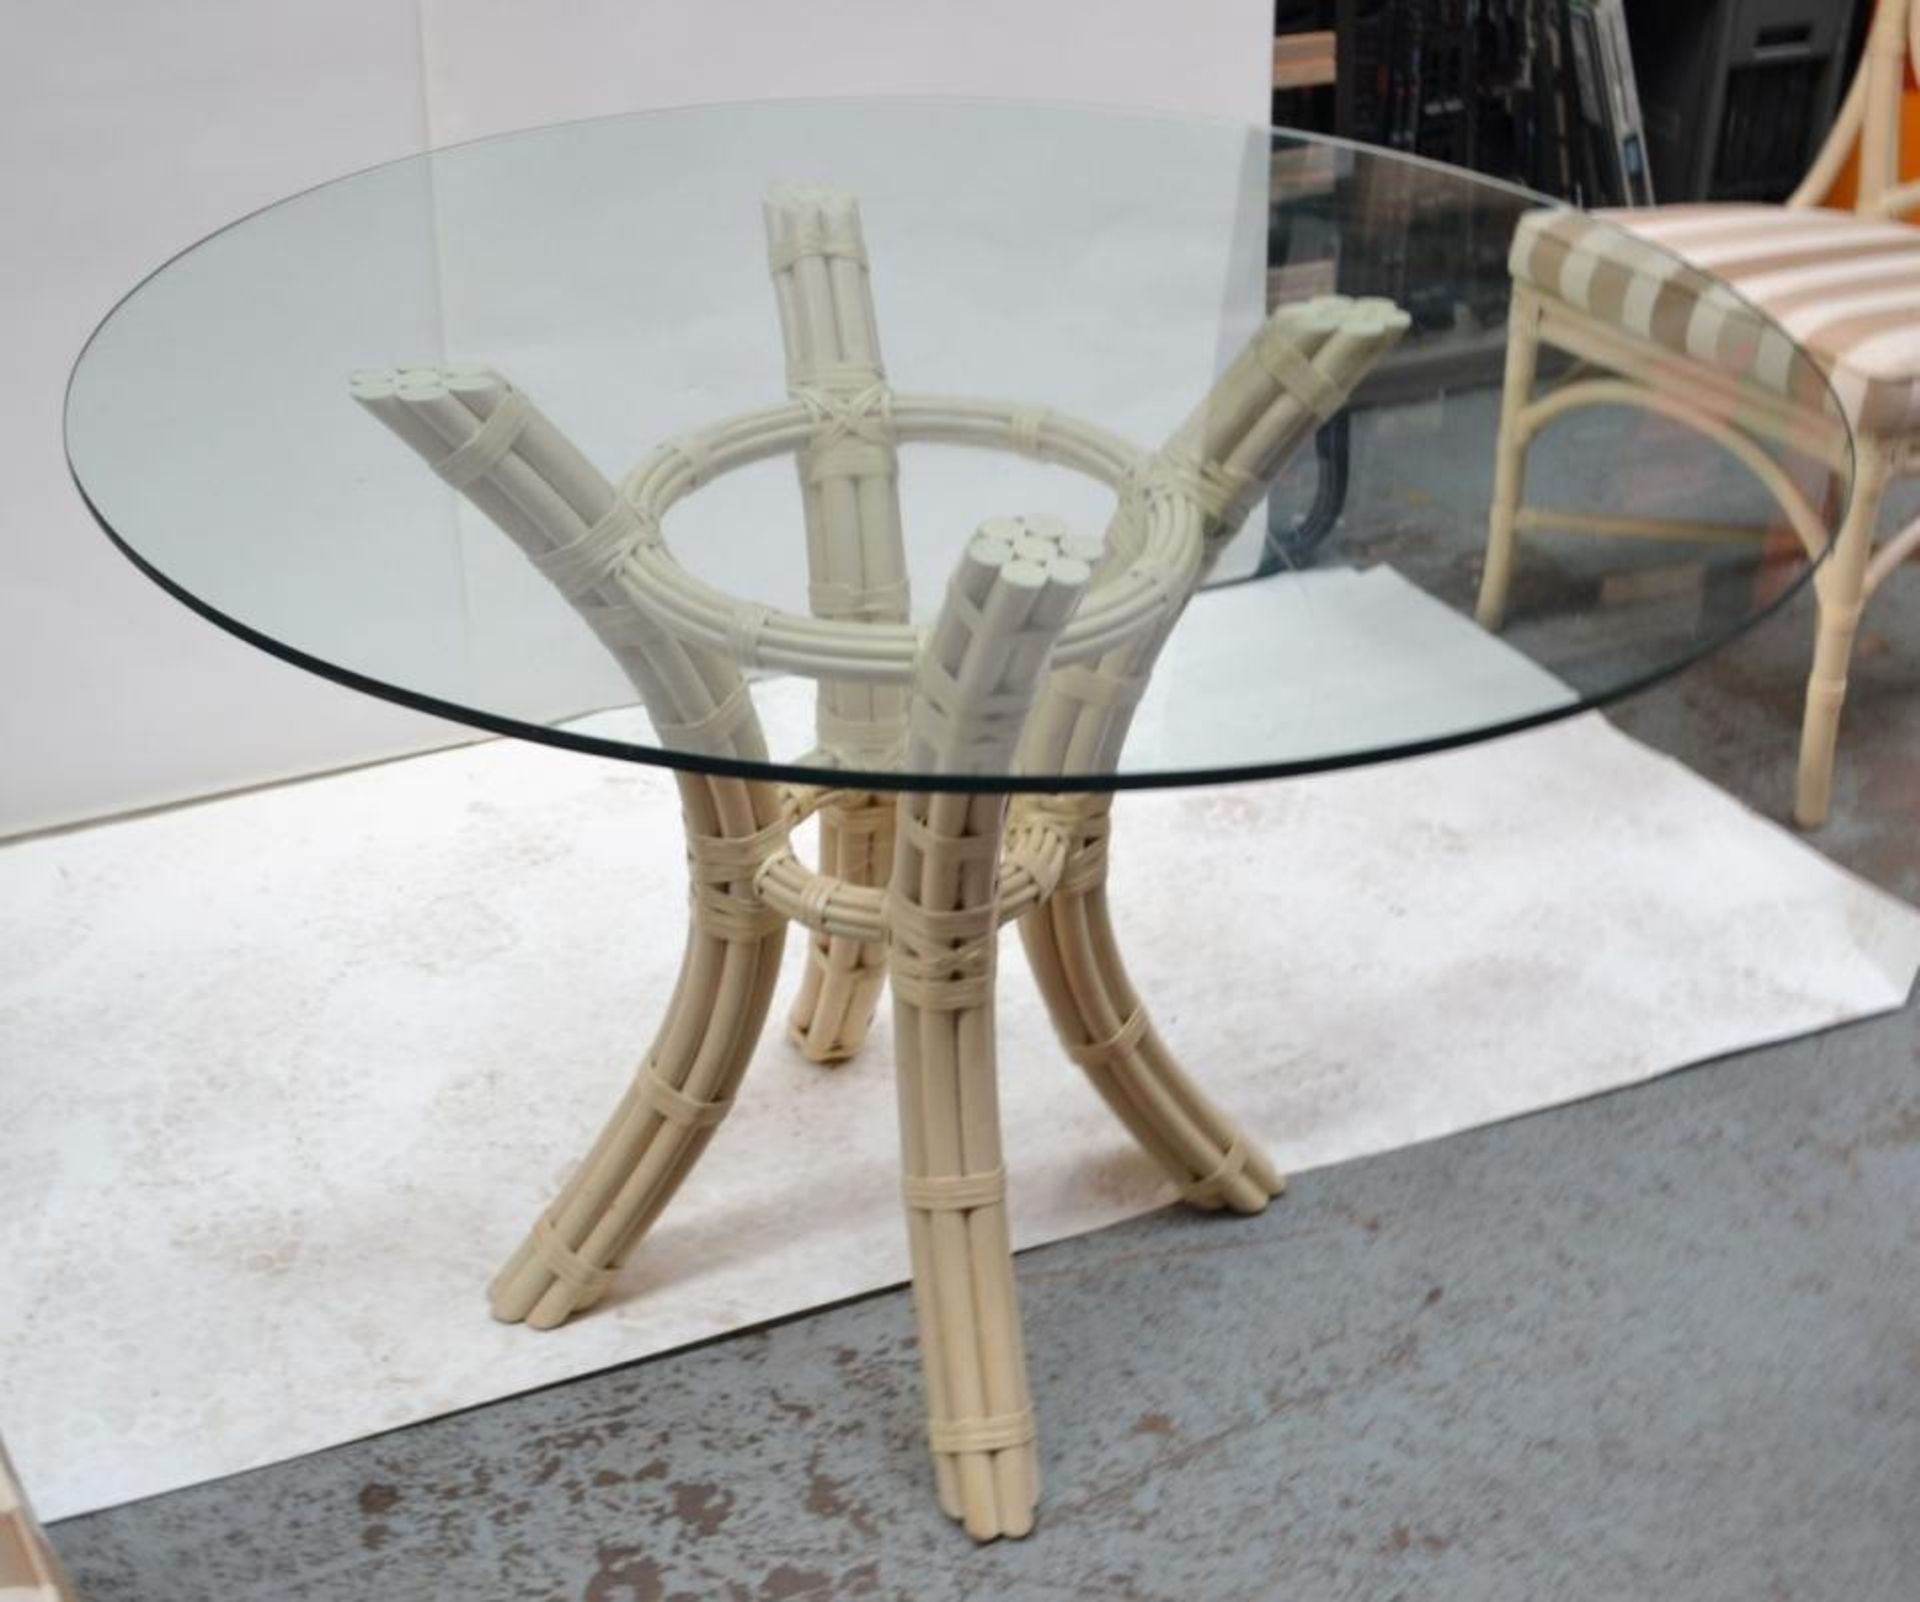 1 x Glass Topped Cane Table with 4 Chairs - Pre-owned In Good Condition - AE010 - CL007 - - Image 11 of 13